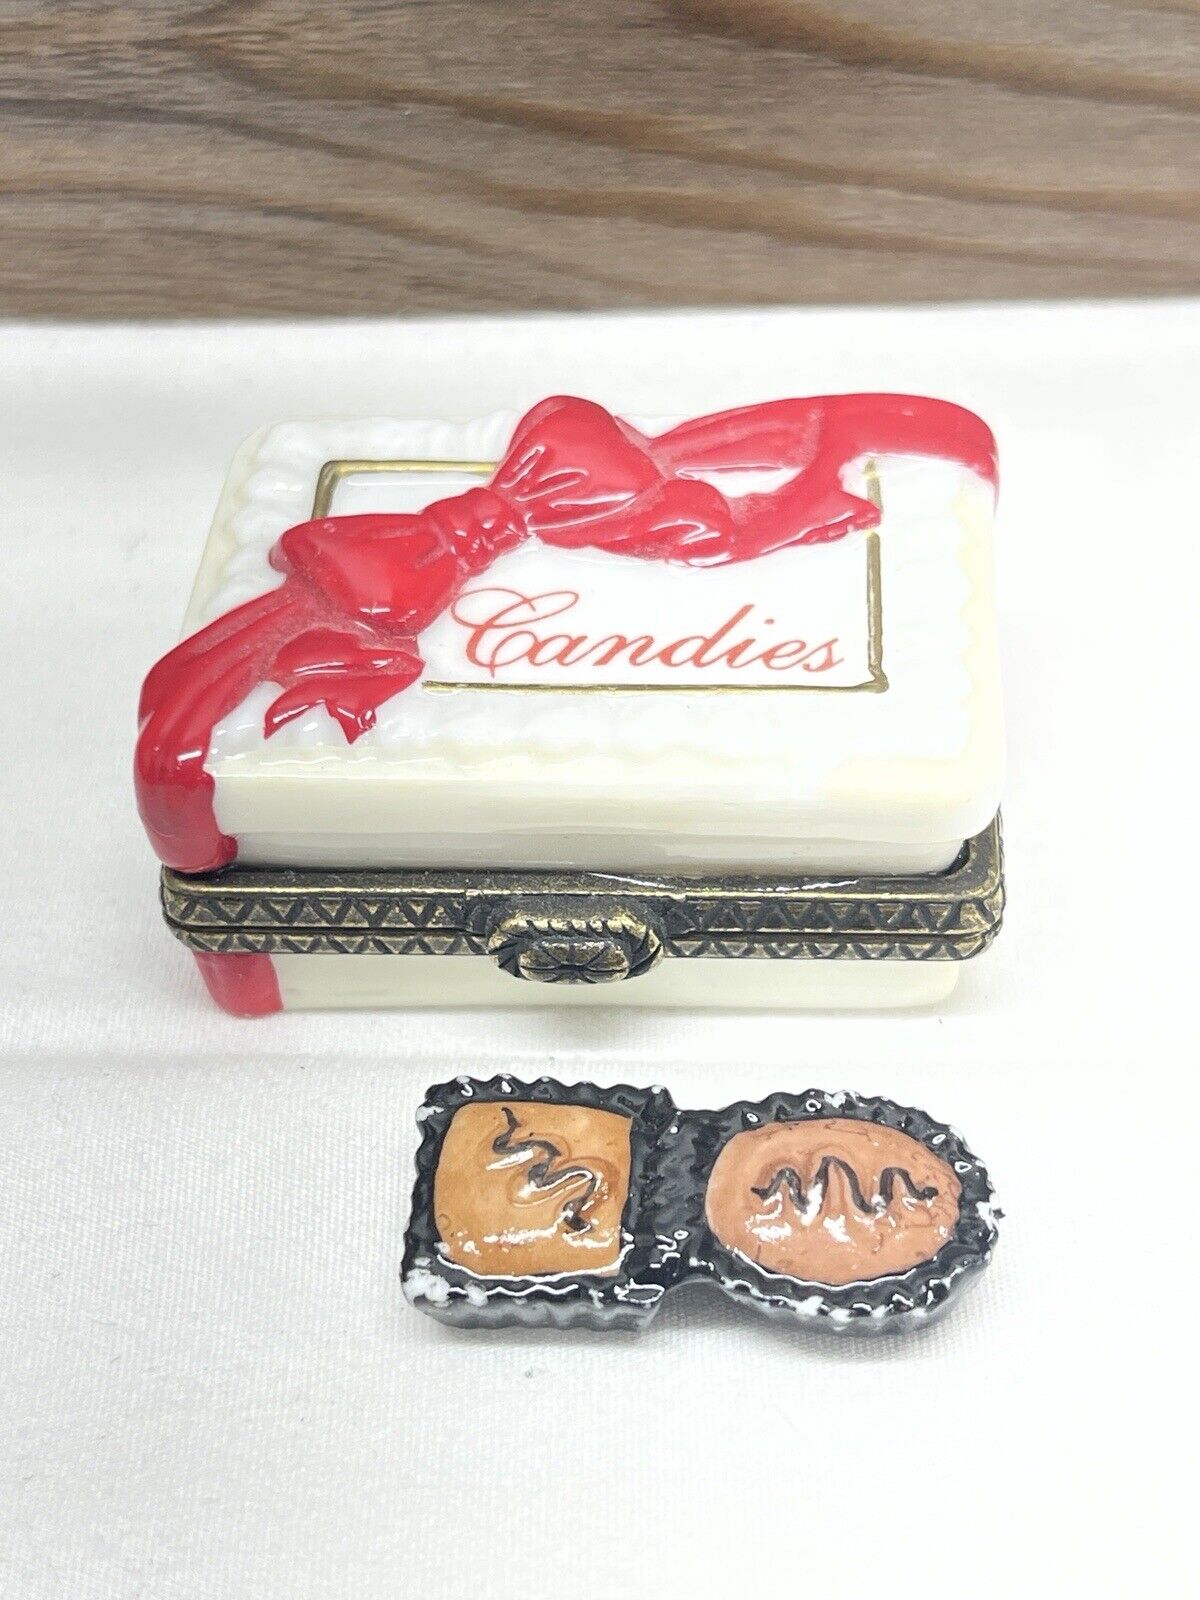 Midwest Of Cannon Falls “Candies” Mini Trinket Box With Chocolates Inside